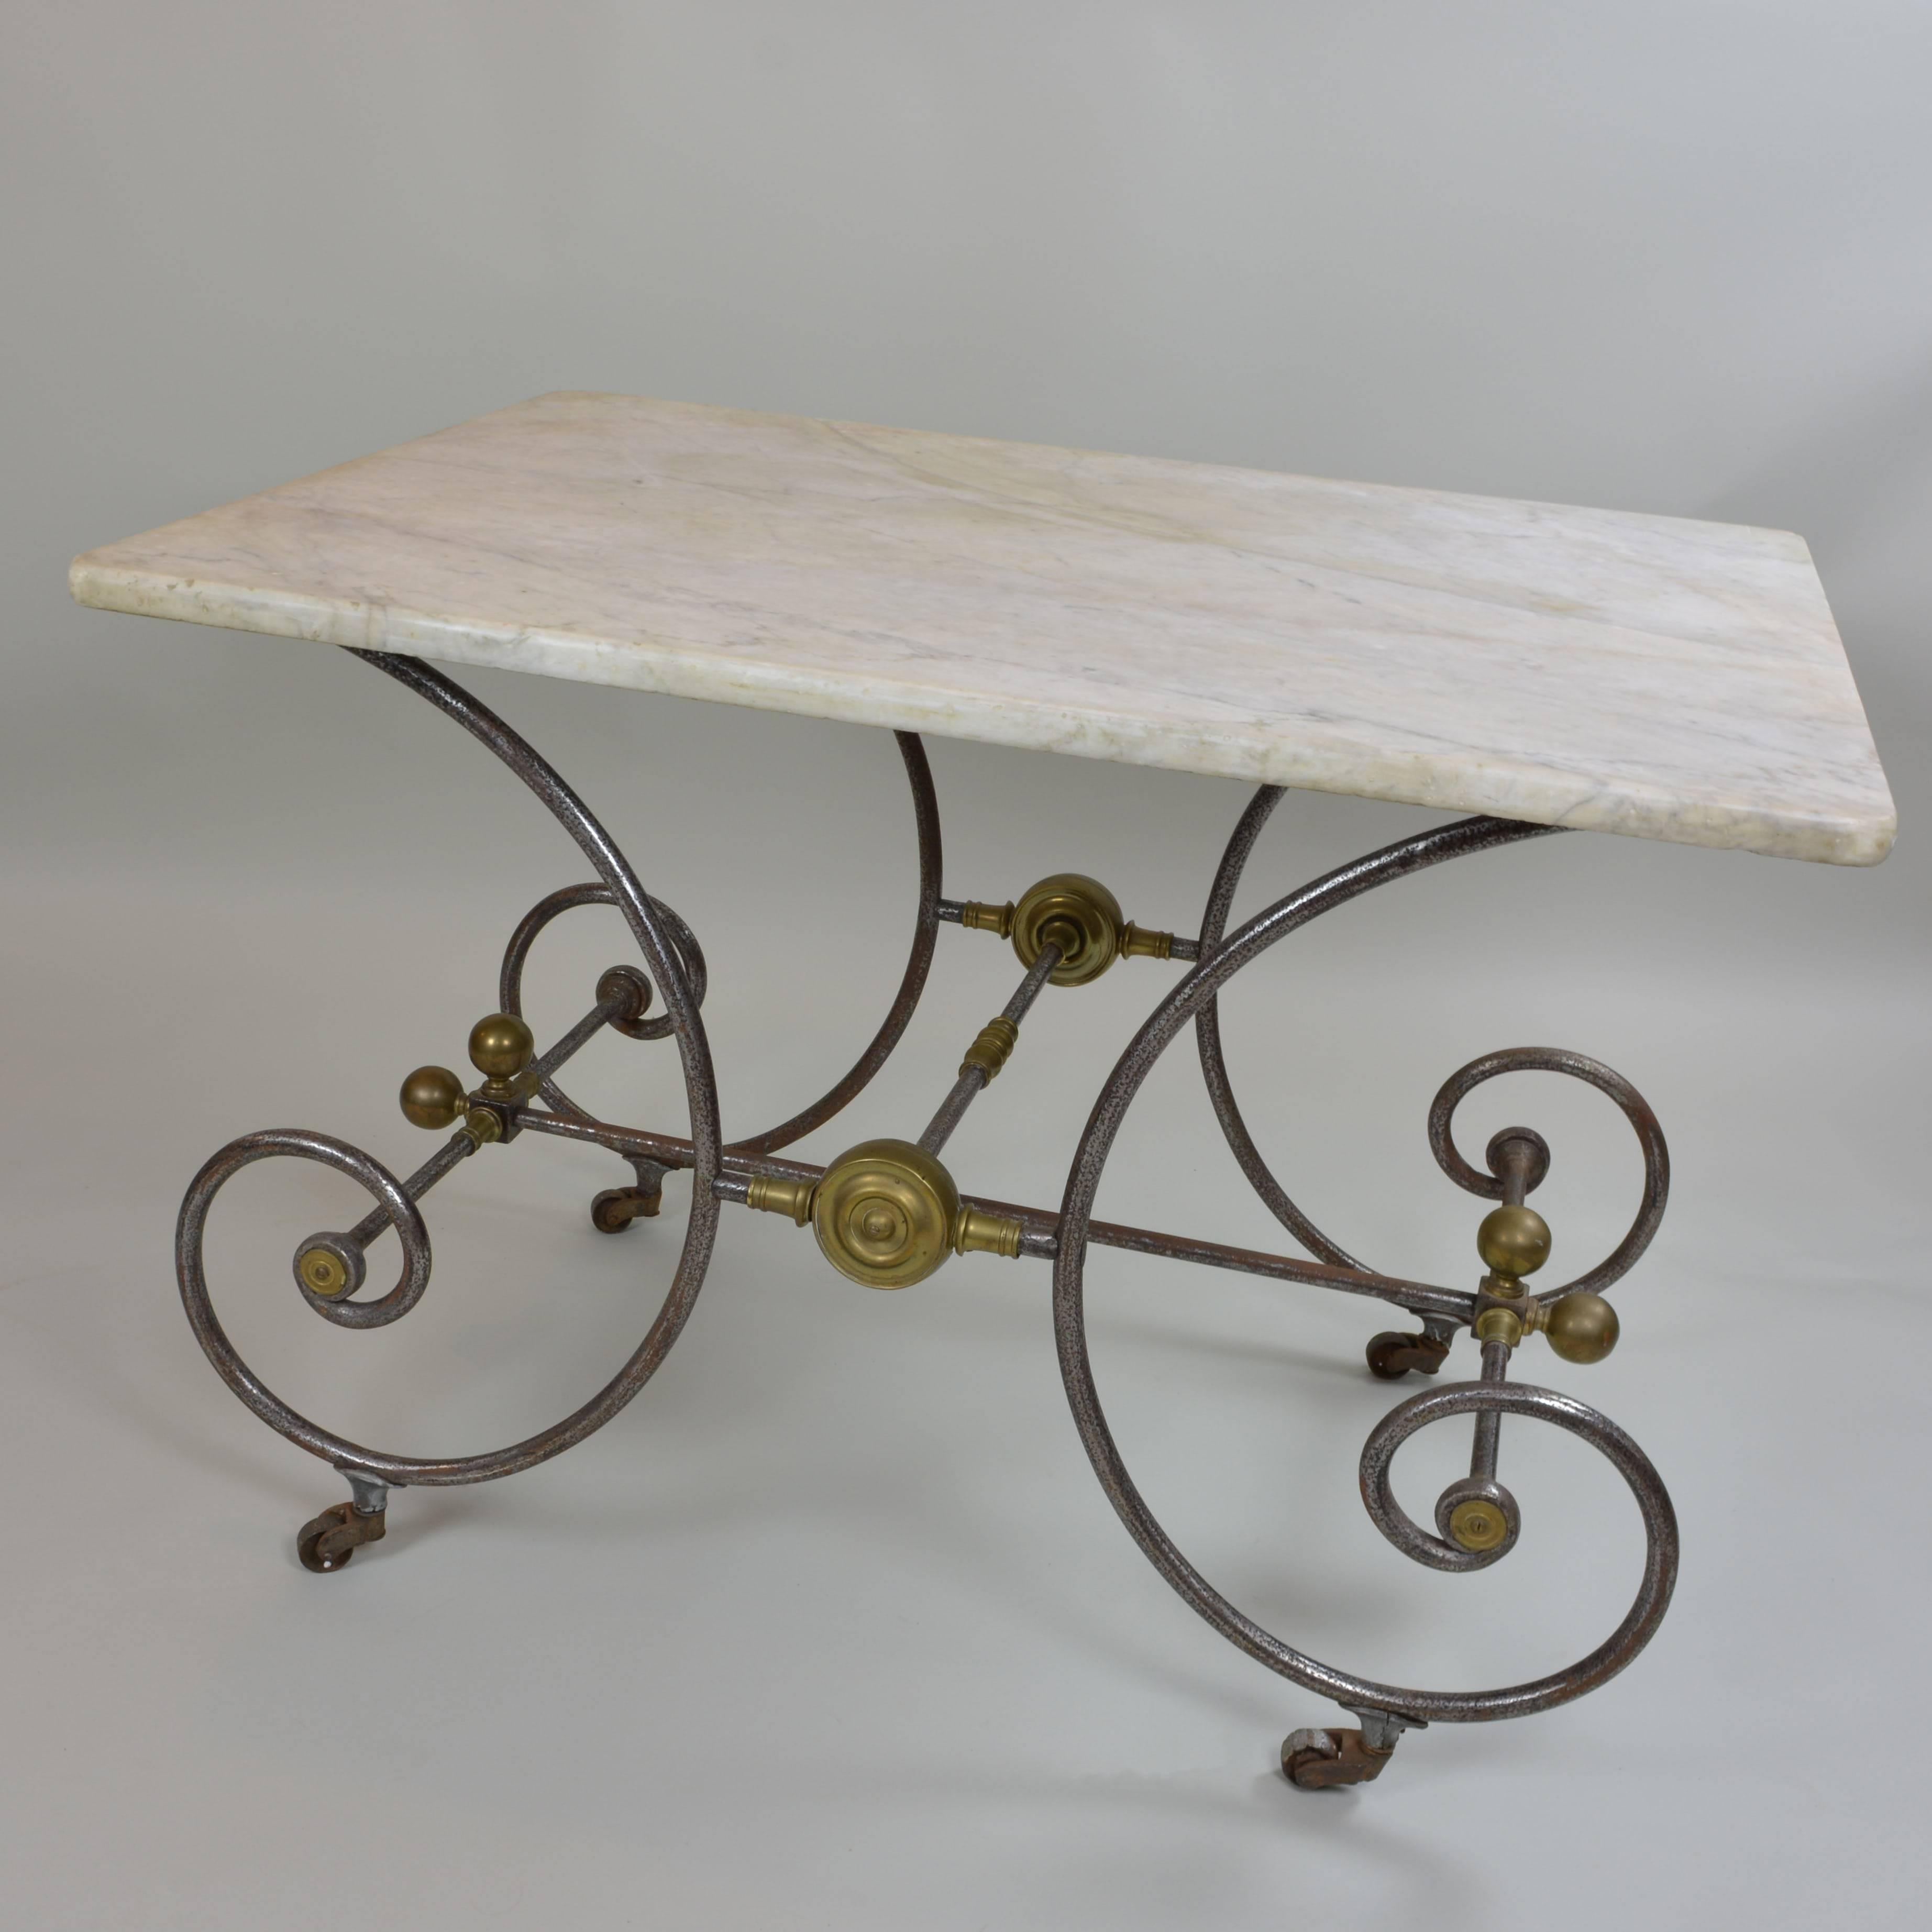 Lovely old pastry maker's table from France, circa 1810. Rich, cream-colored marble top; graceful wrought iron frame with brass accents and casters. Light patina of rust adds to its Old World charm. 

Bakery tables were often used in exclusive